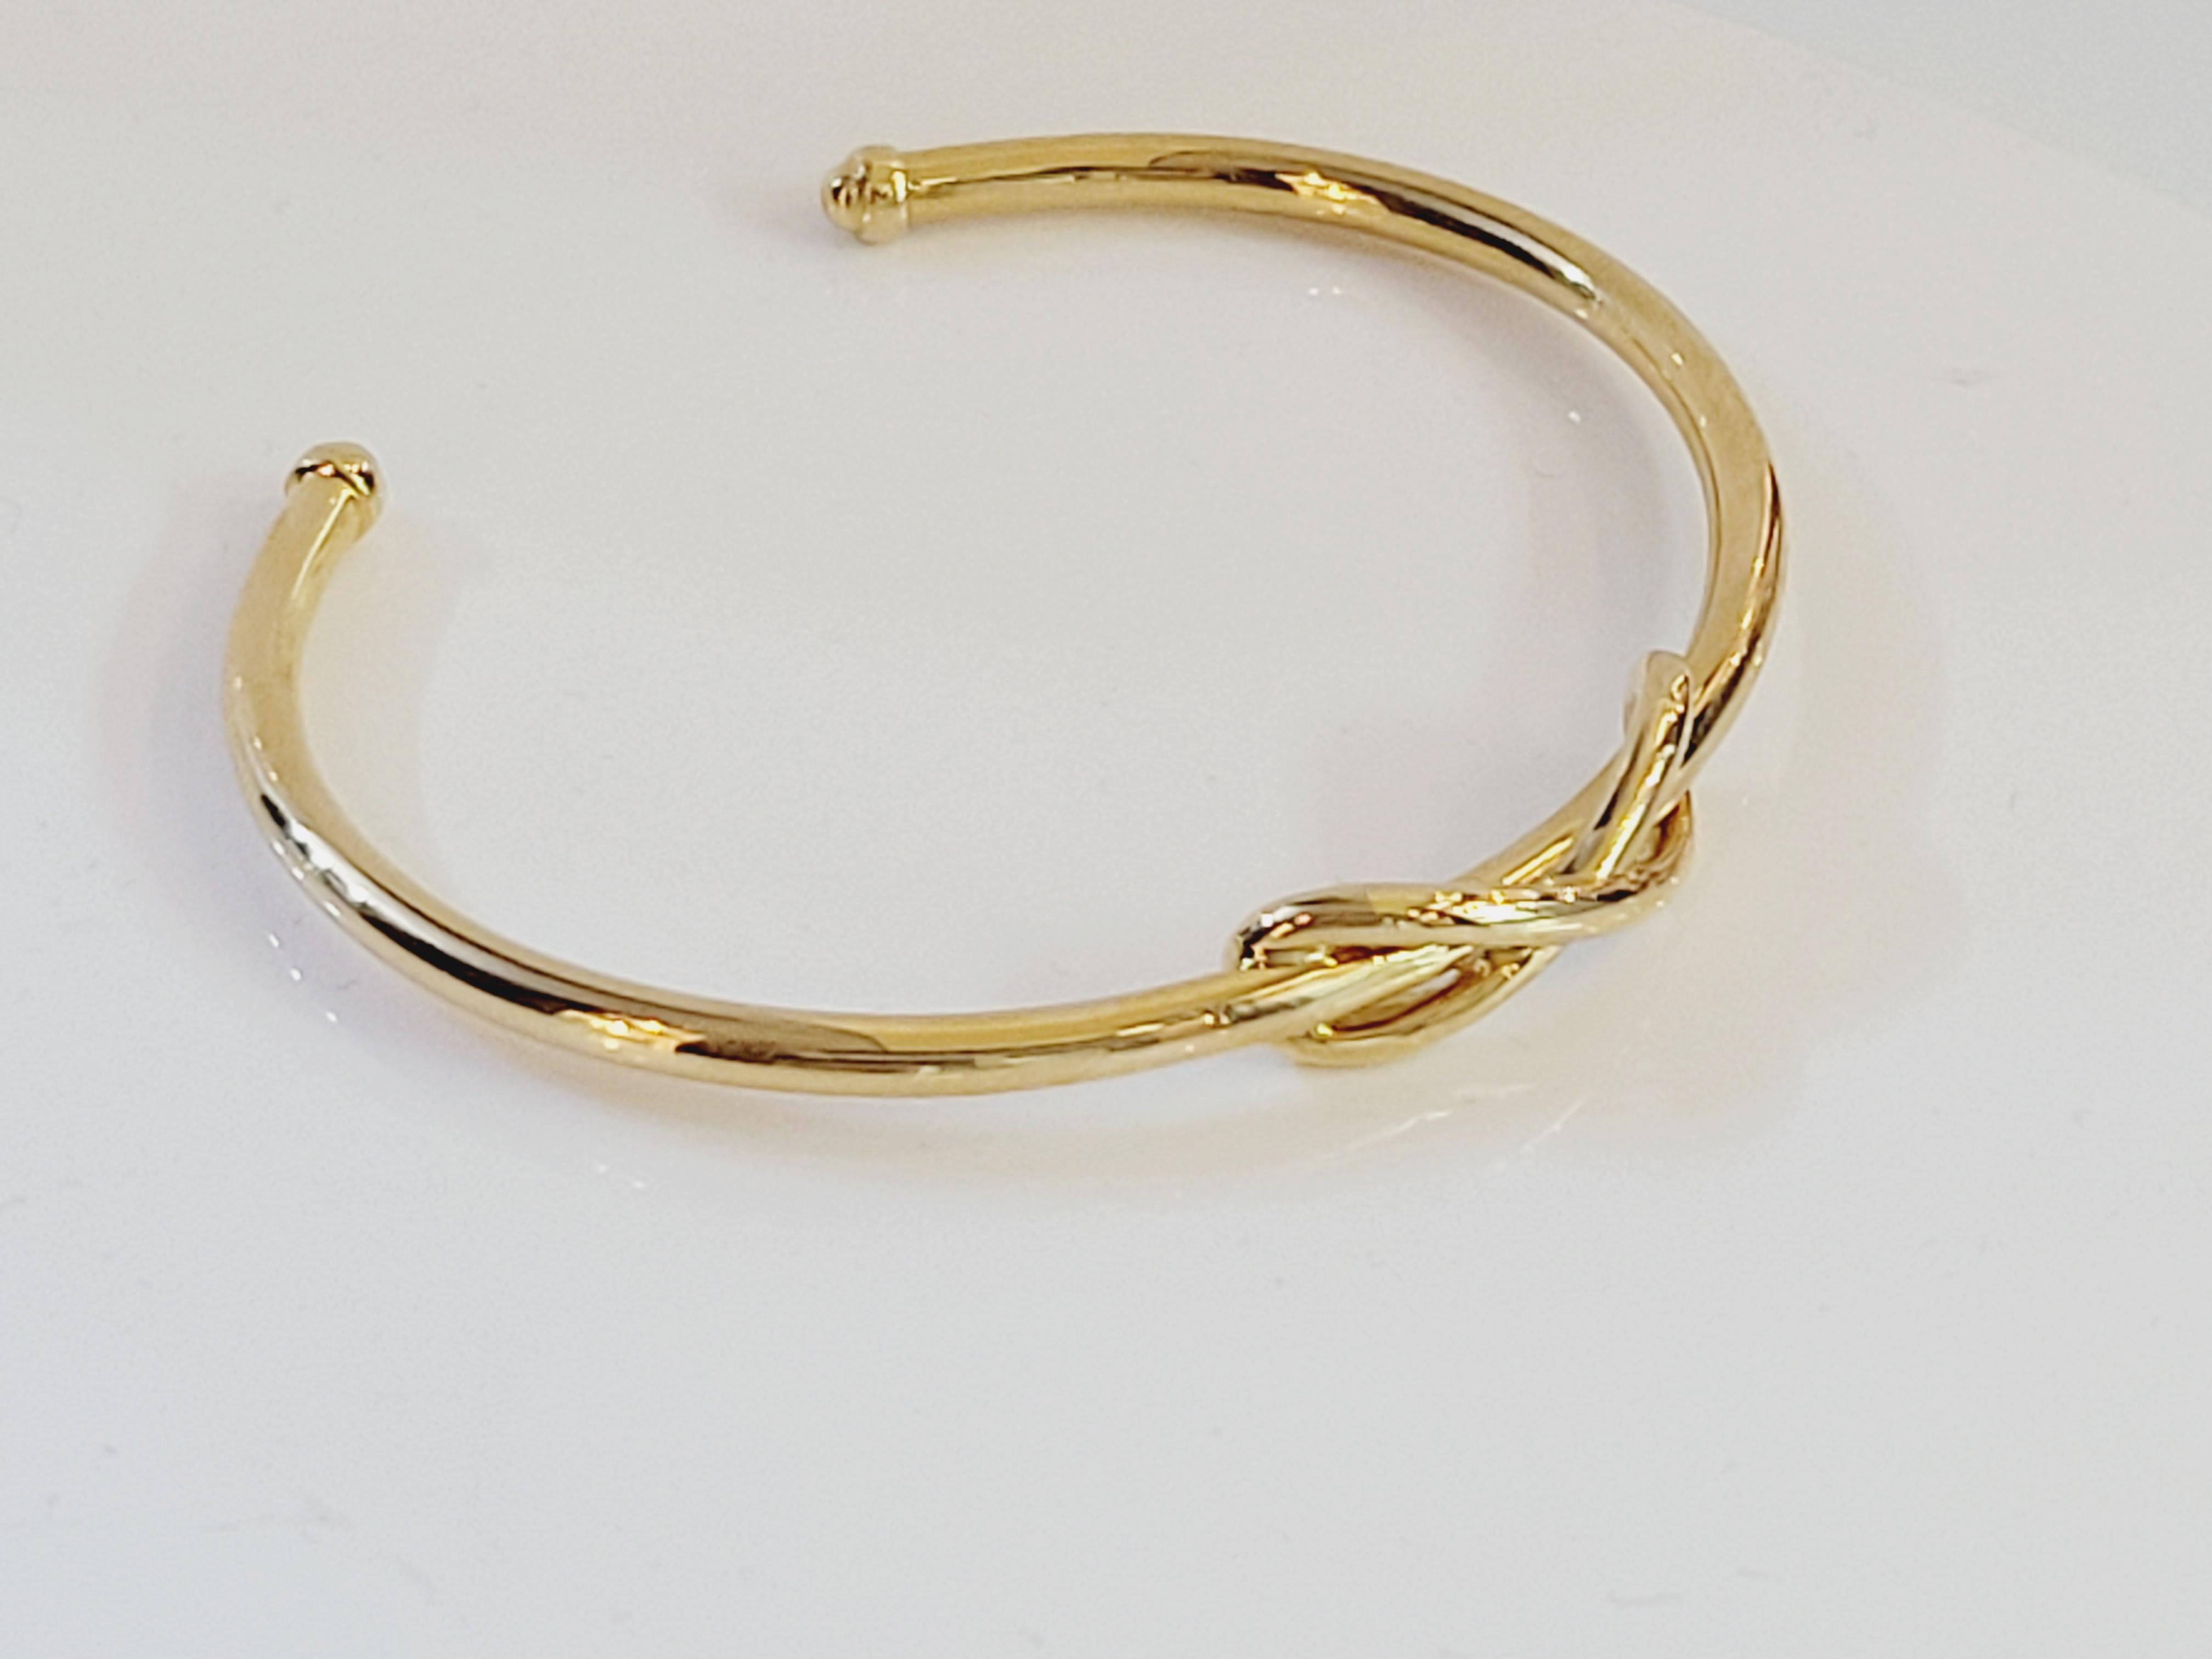 Brand-Tiffany &CO
Mint Condition
Type-Bracelet
Medium Size 
Style-cuff
Shape-Infiniti Motif
Base Metal-Yellow Gold
Metal purity-18K
Bracelet-18.7g
Comes with Tiffany &CO original pouch